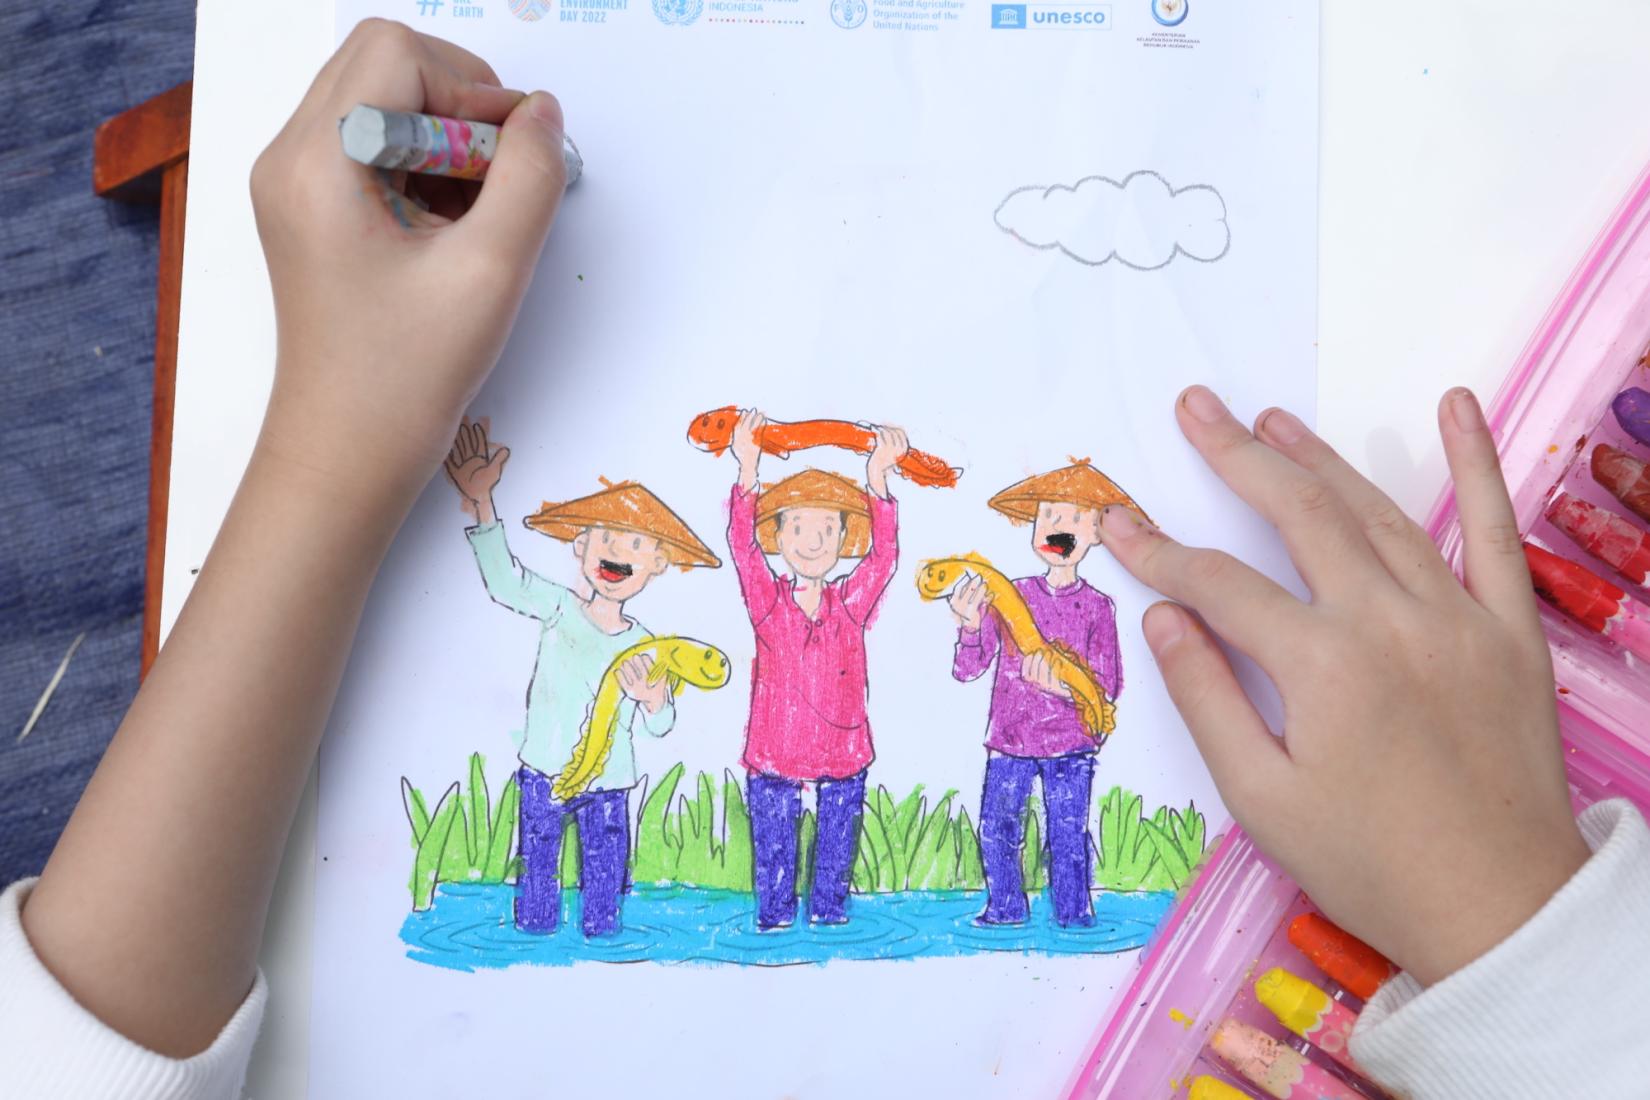 An elementary school student joins a coloring competition to raise awareness of FAO’s joint programme with the Ministry of Marine Affairs and Fisheries to protect Indonesia’s threatened inland fish species on June 16, 2022